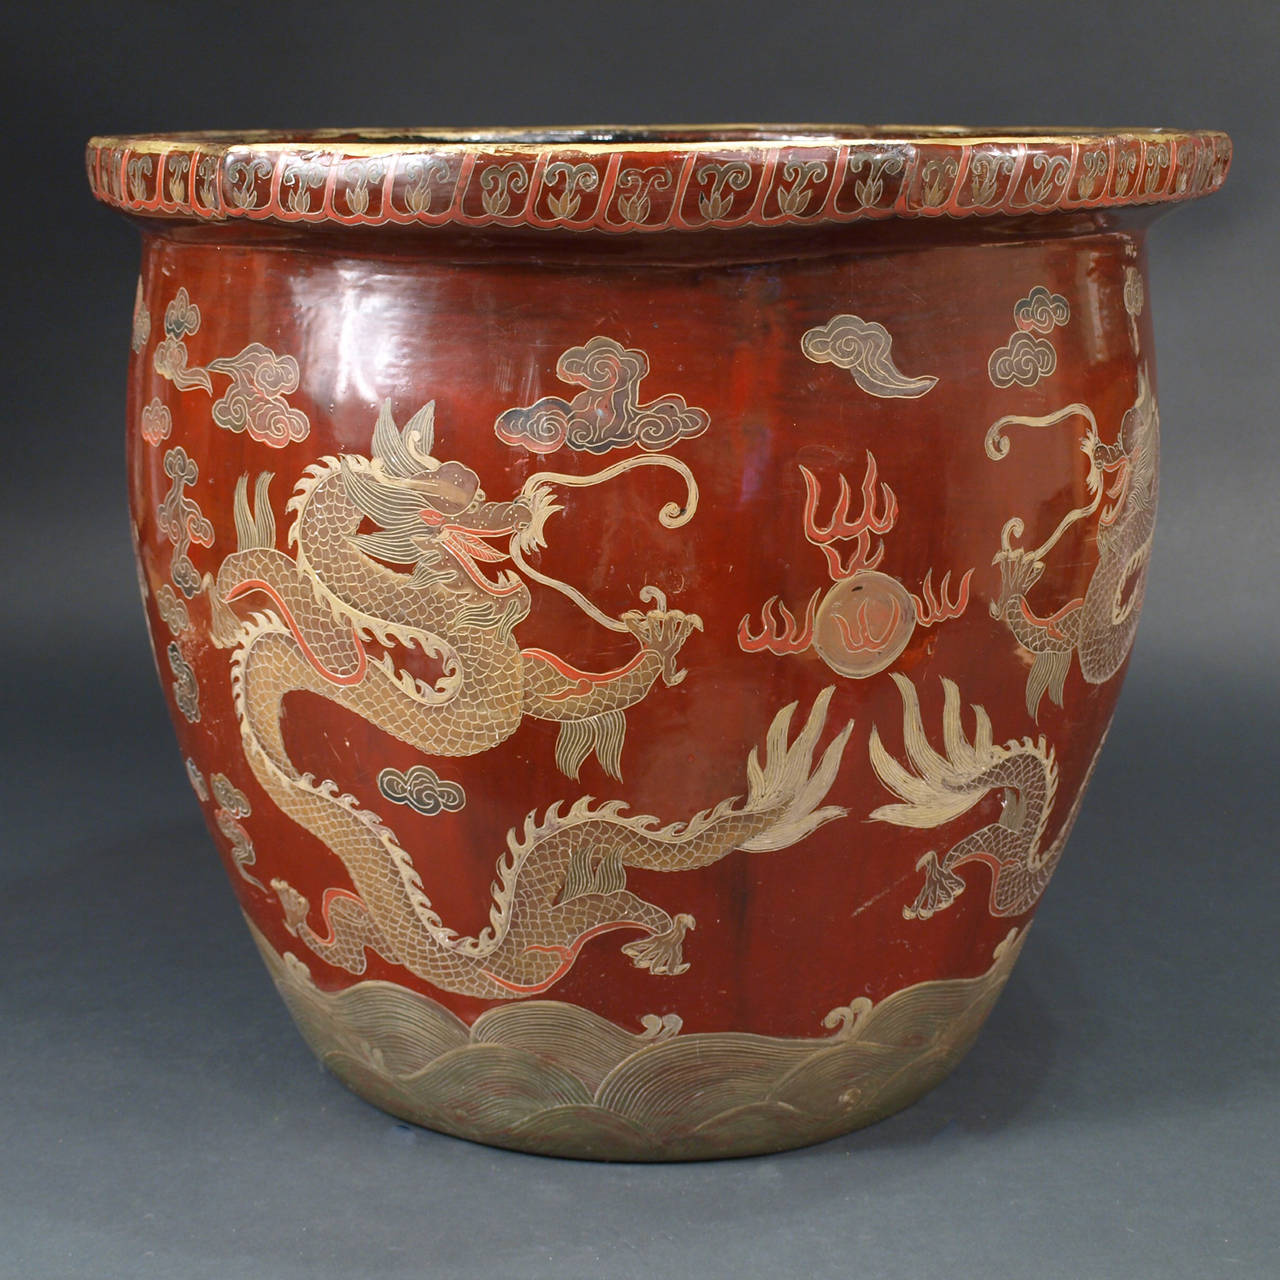 A large Chinese lacquer jardiniere decorated with dragons among the clouds looking for the sacred pearl.
The upper rim is decorated with bats and longevity peaches,
China, end of the 19th century.